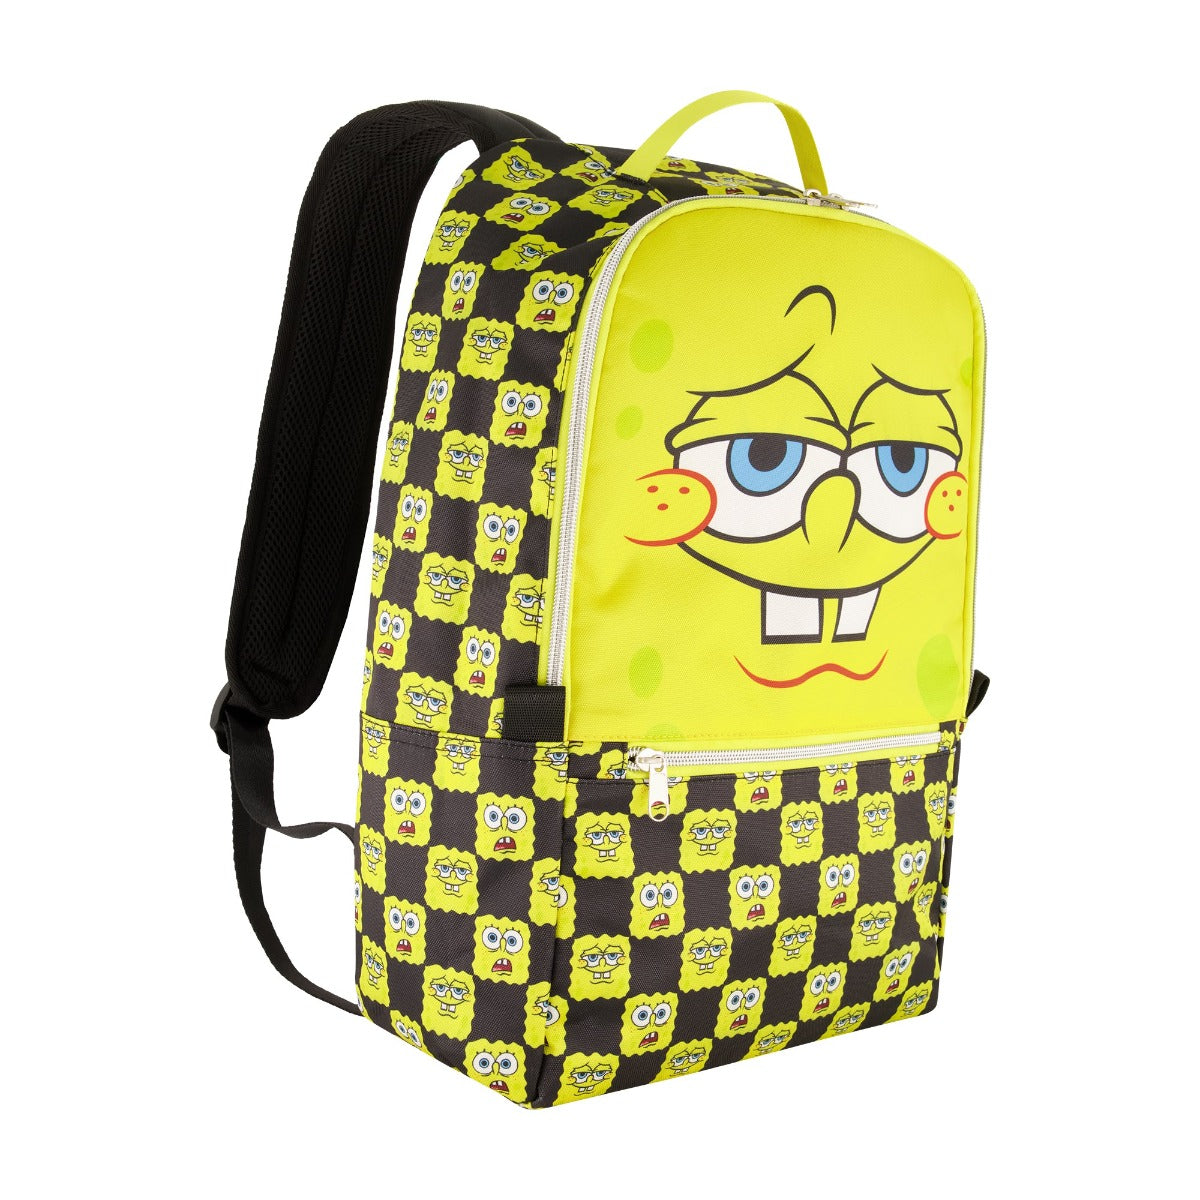 Yellow and black checkered Spongebob Squarepants big face backpack - best backpacks for kids and adults